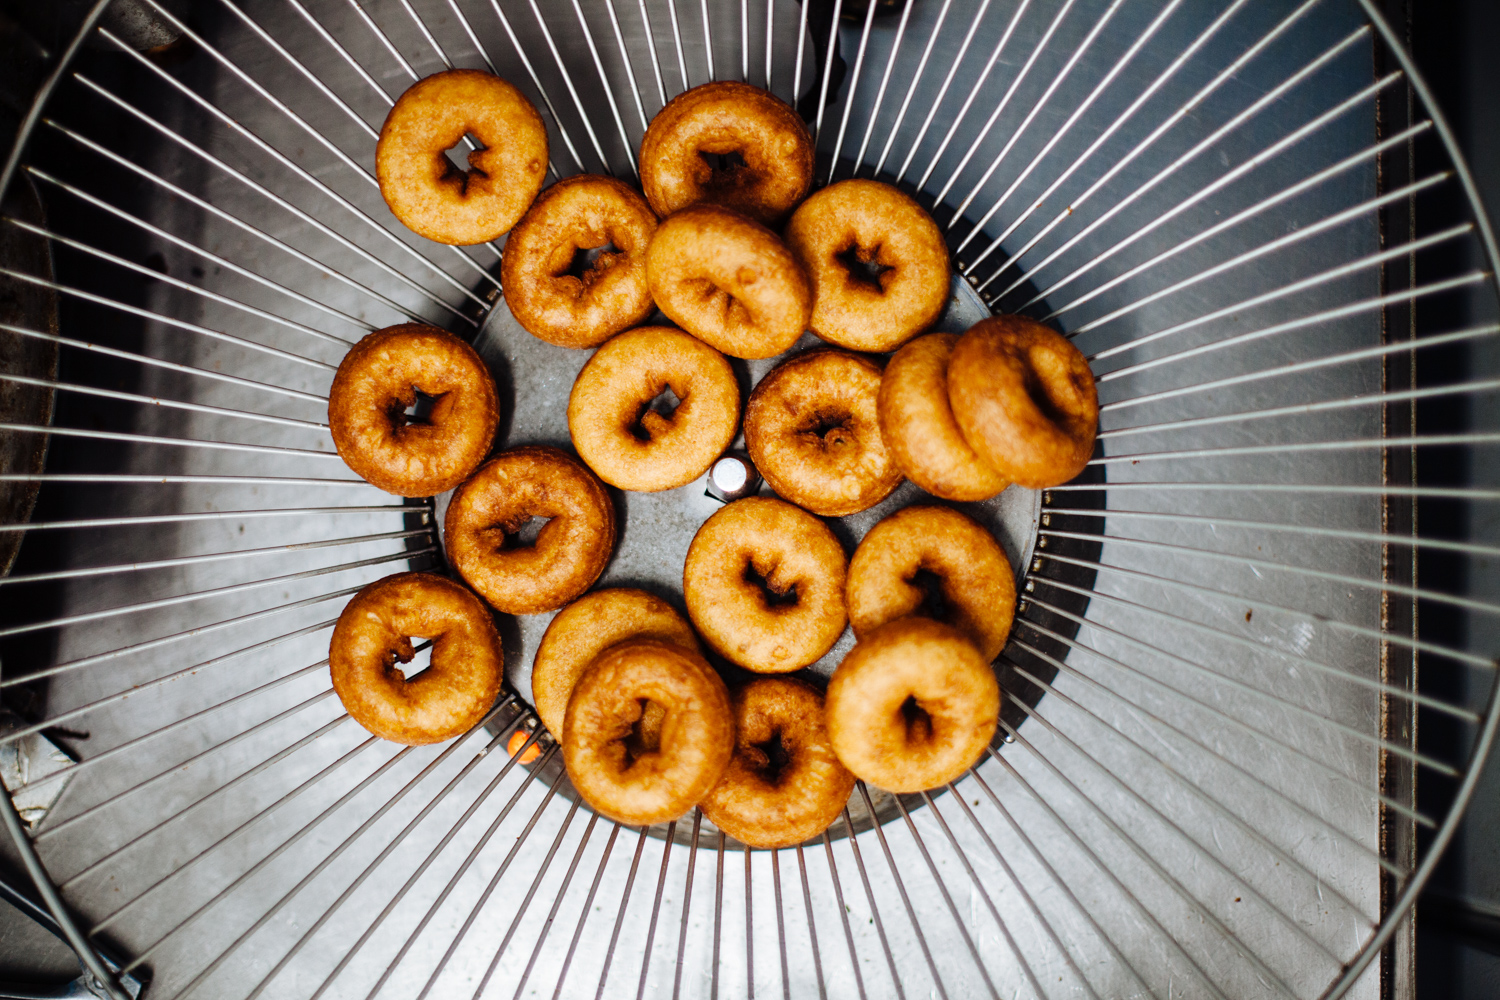  The cider doughnuts from Tantillo's Farm Market are lofty,&nbsp;light and fantastically crunchy. 